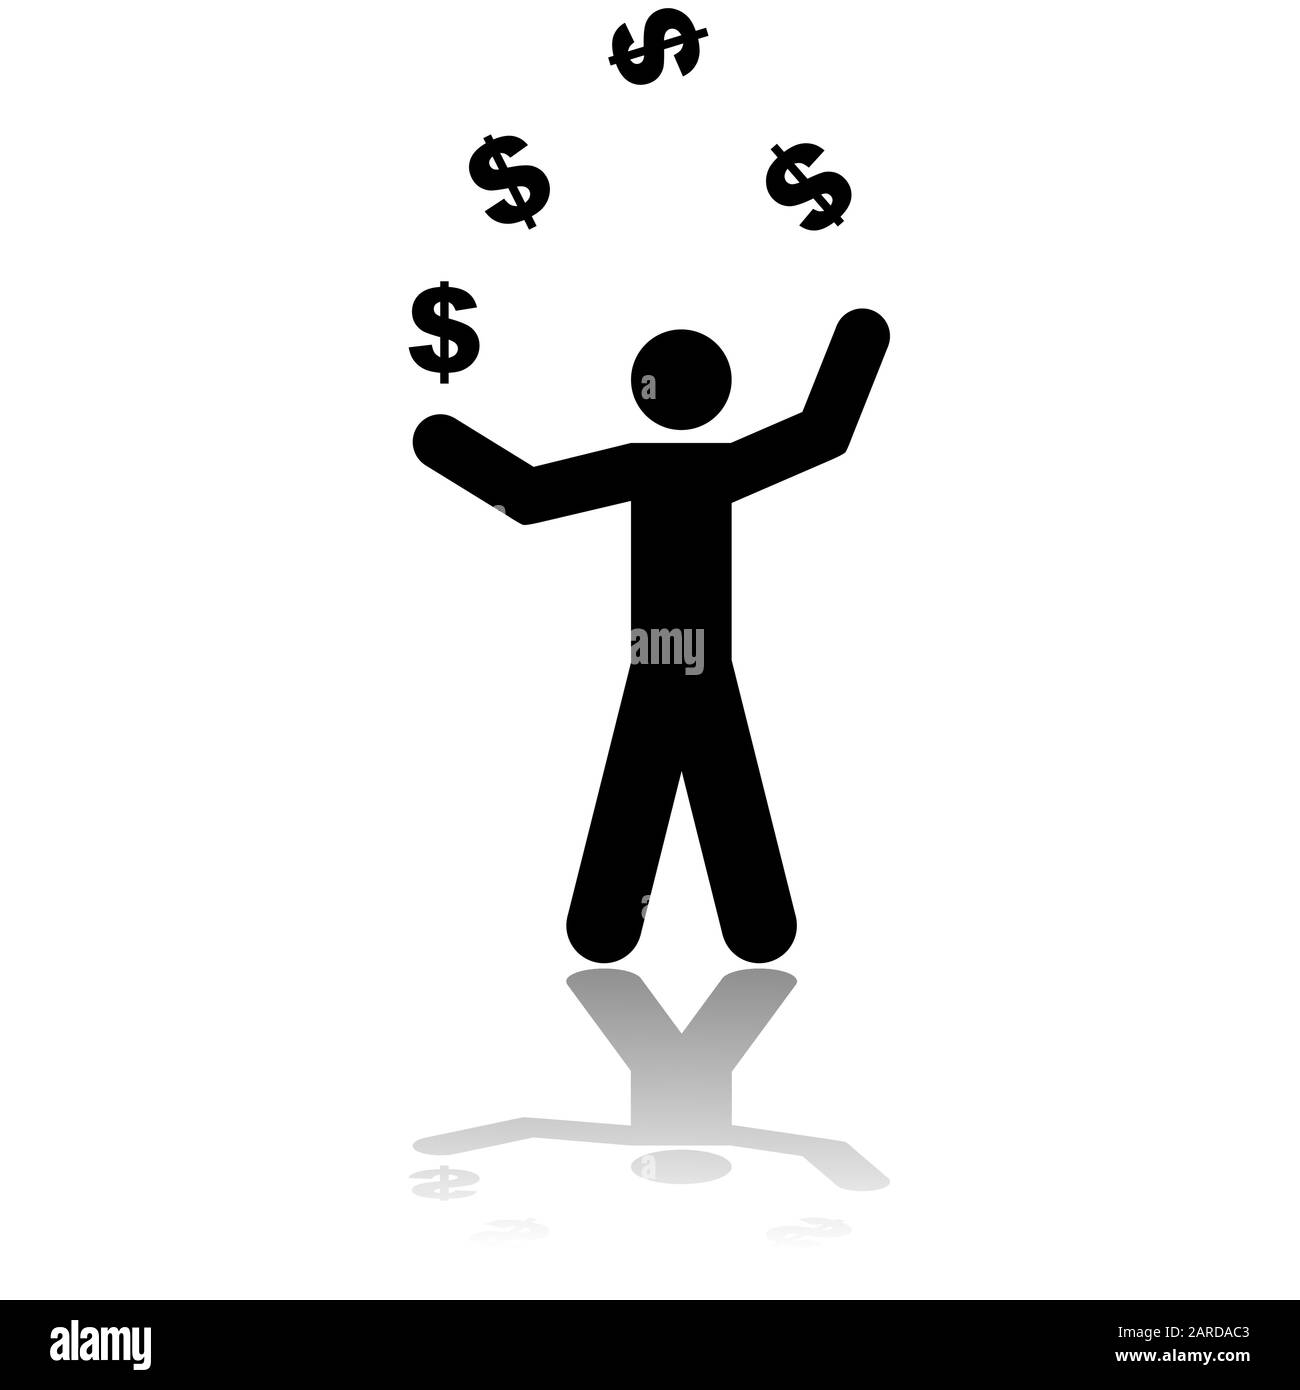 Concept icon illustration showing a person juggling dollar signs Stock Vector